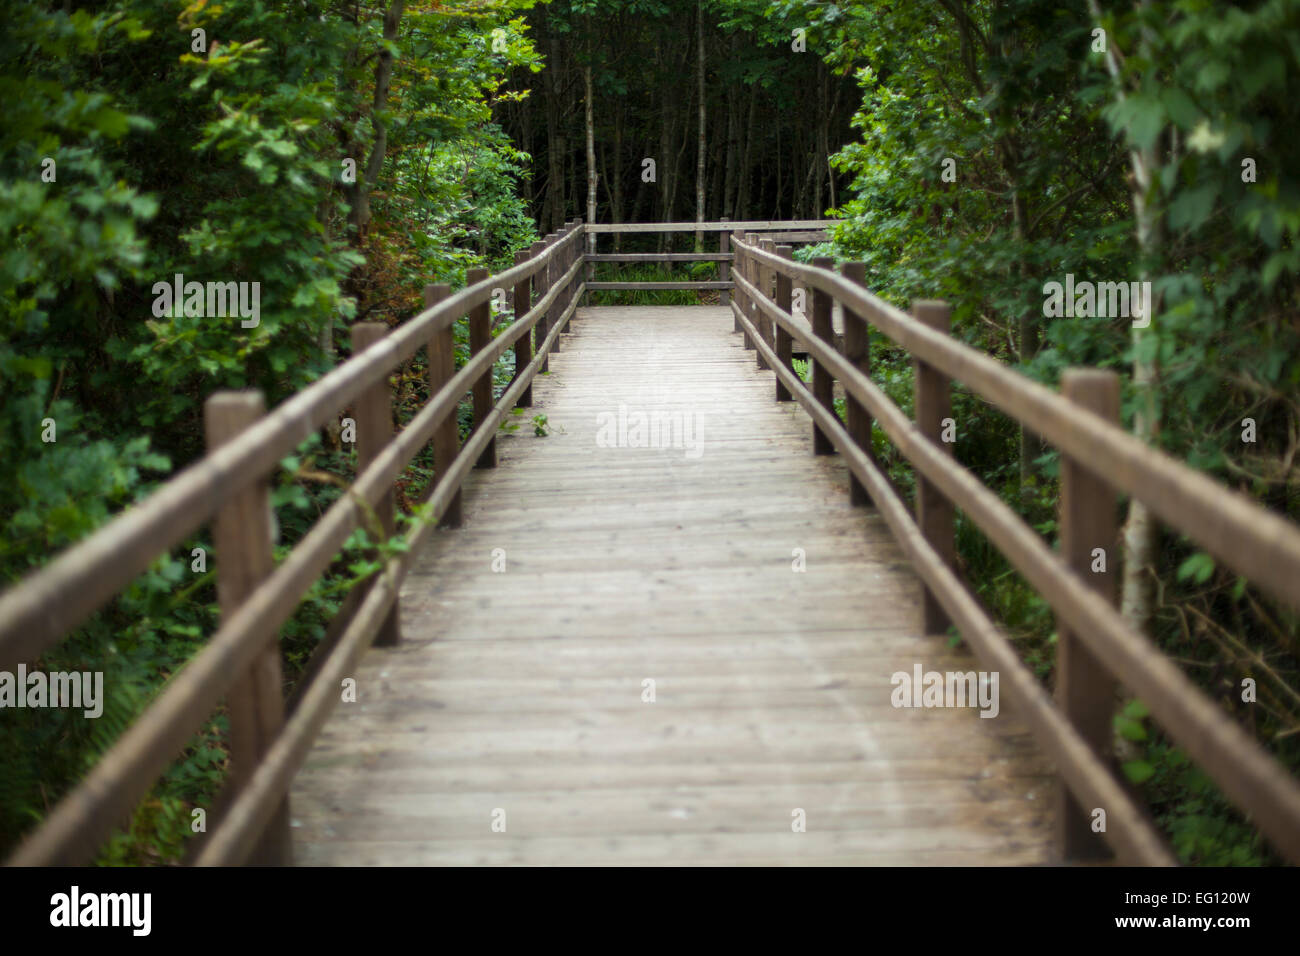 Board walk through a forest Stock Photo